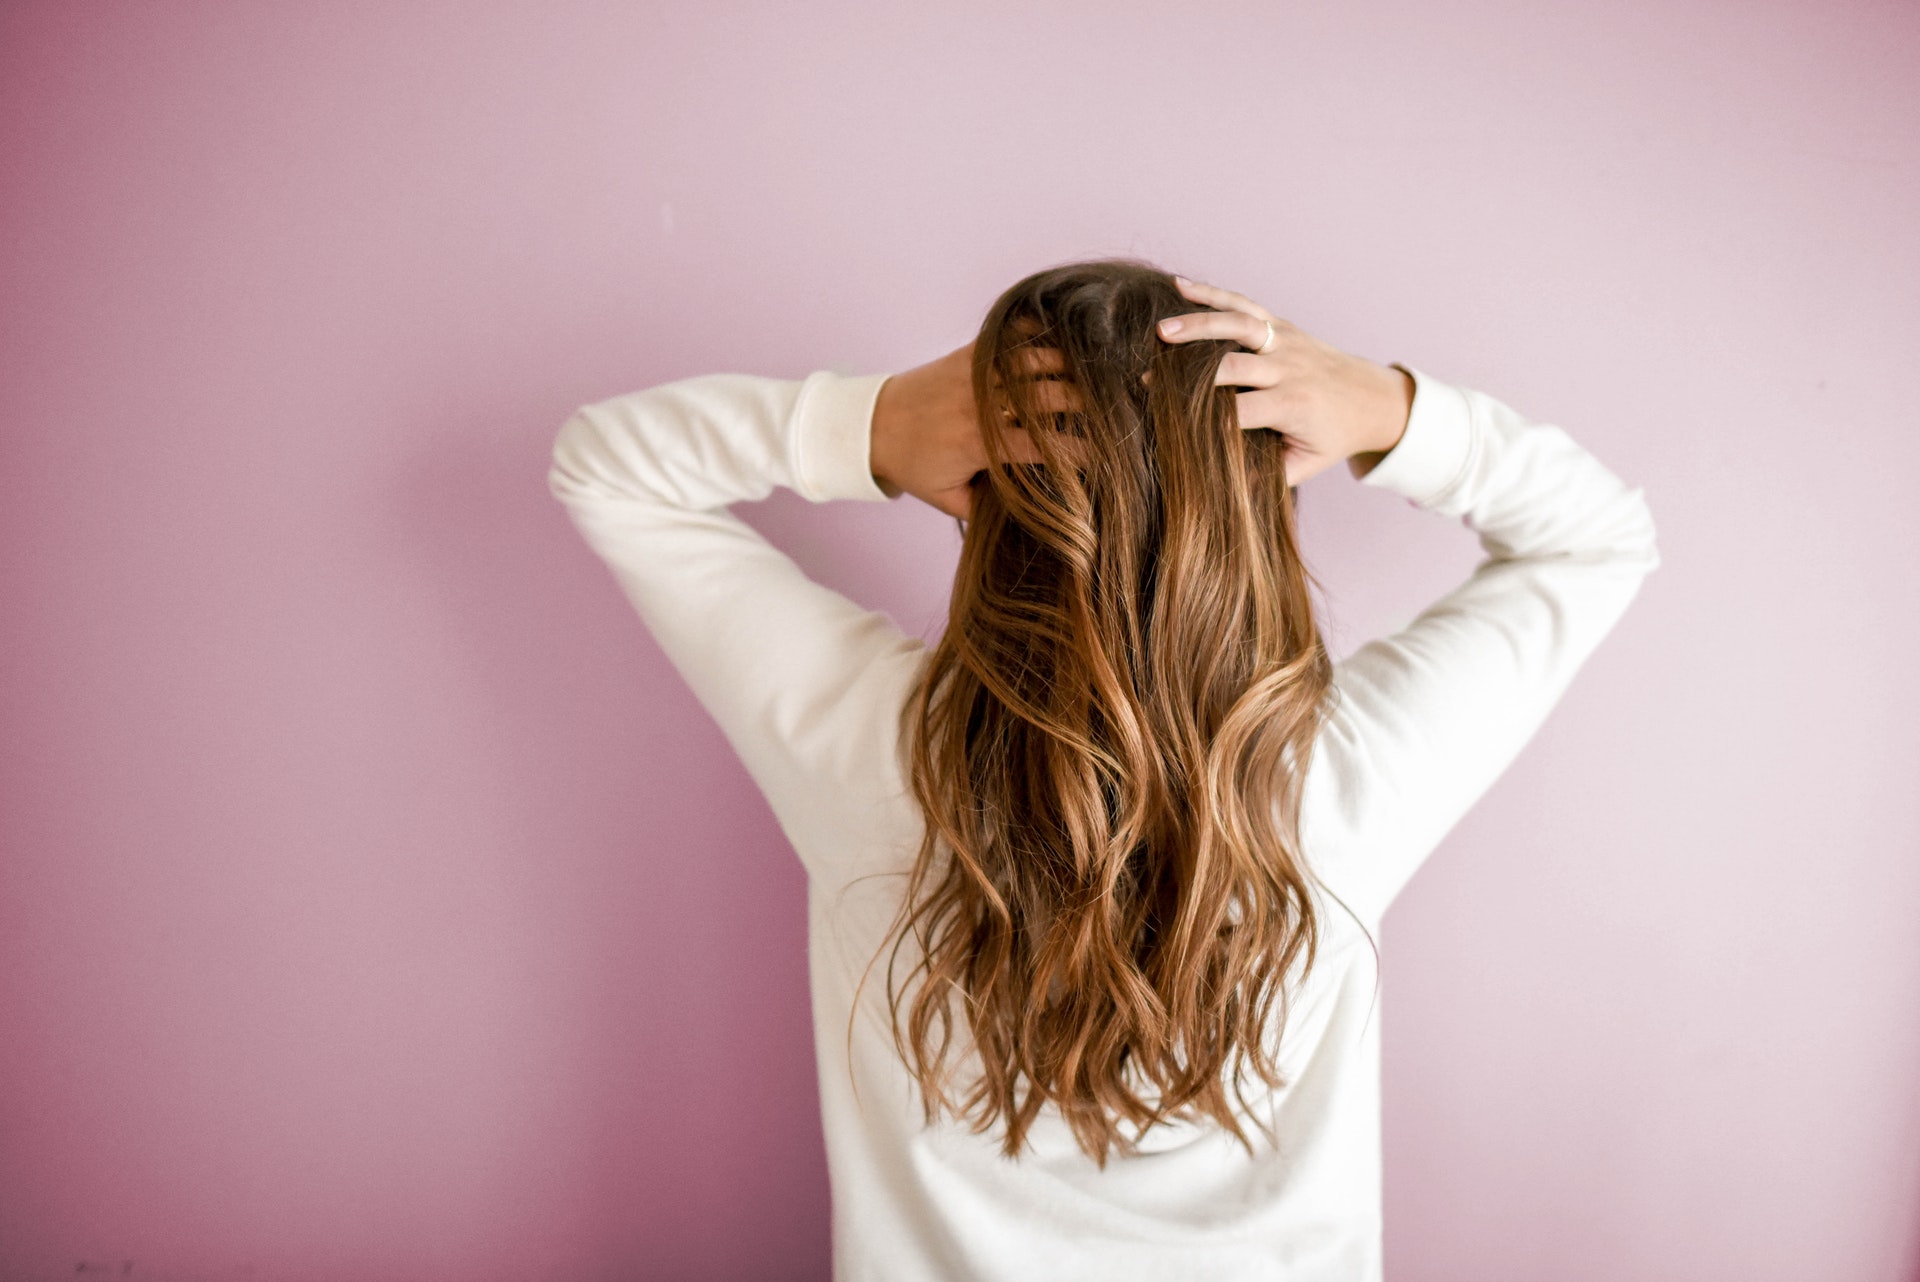 5 Nutrients That Help Keep Your Hair Healthy and Strong